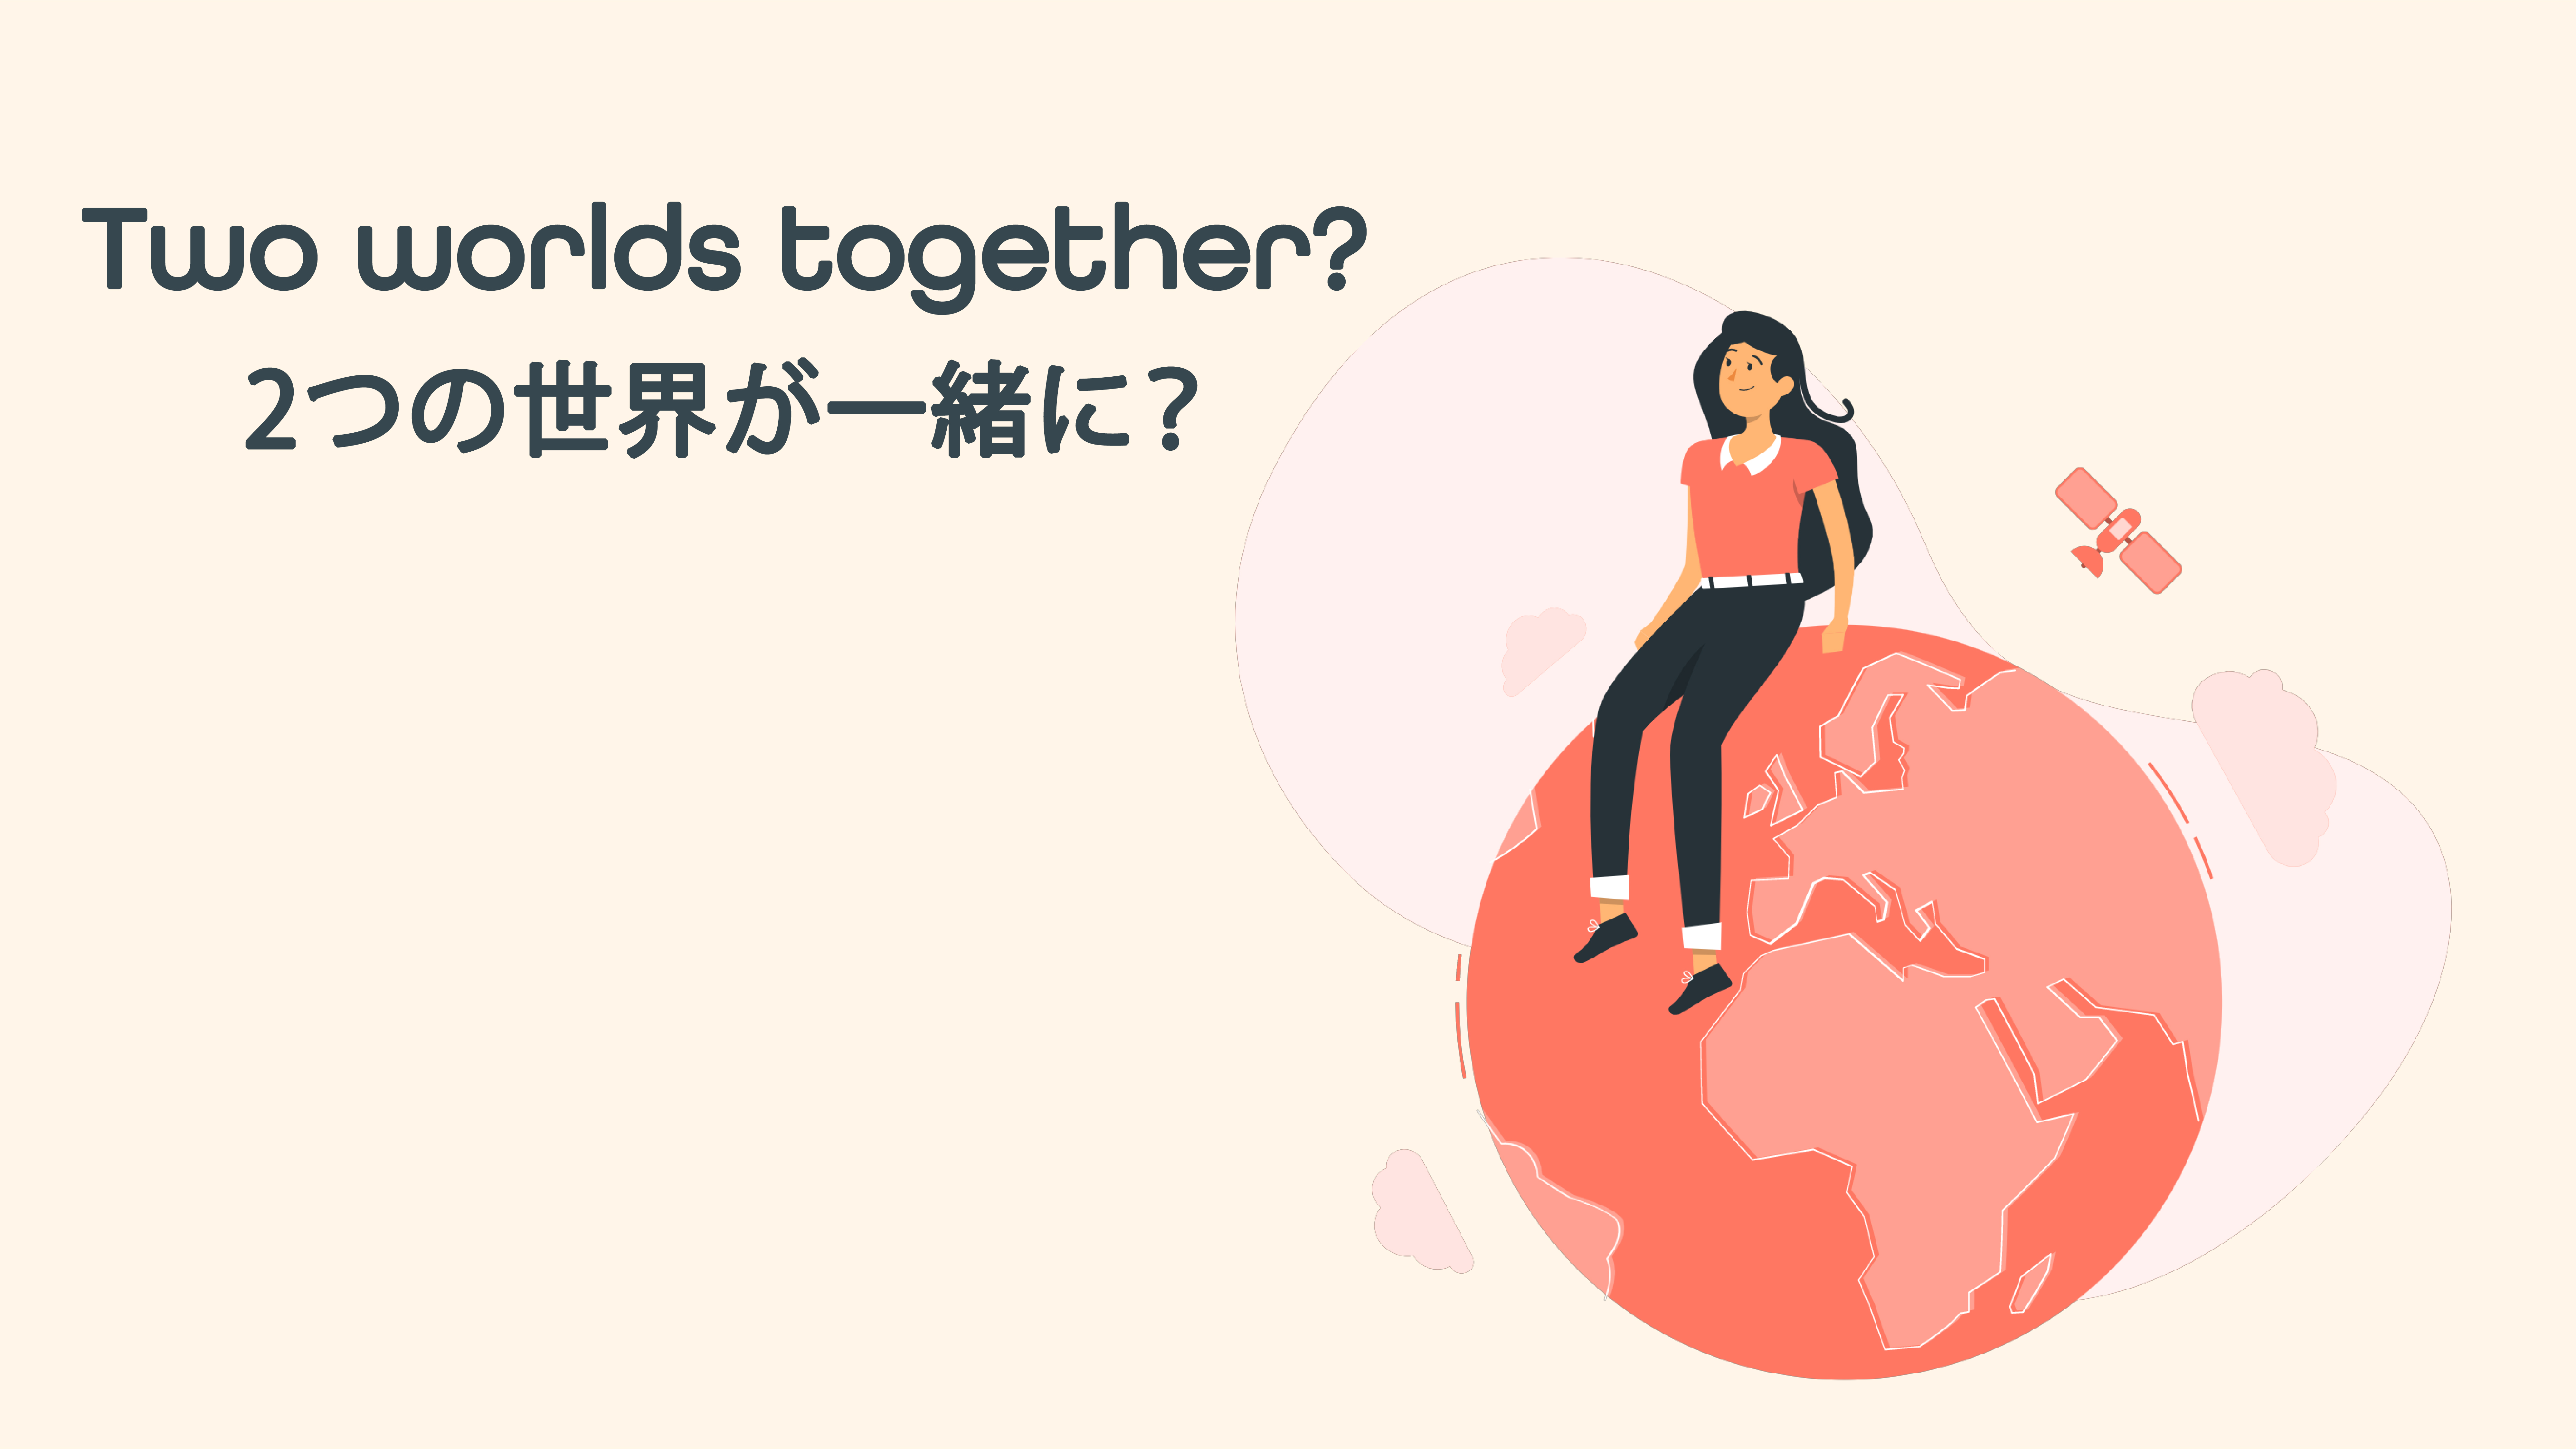 Featured image for “Two worlds together? 2つの世界が一緒に？”